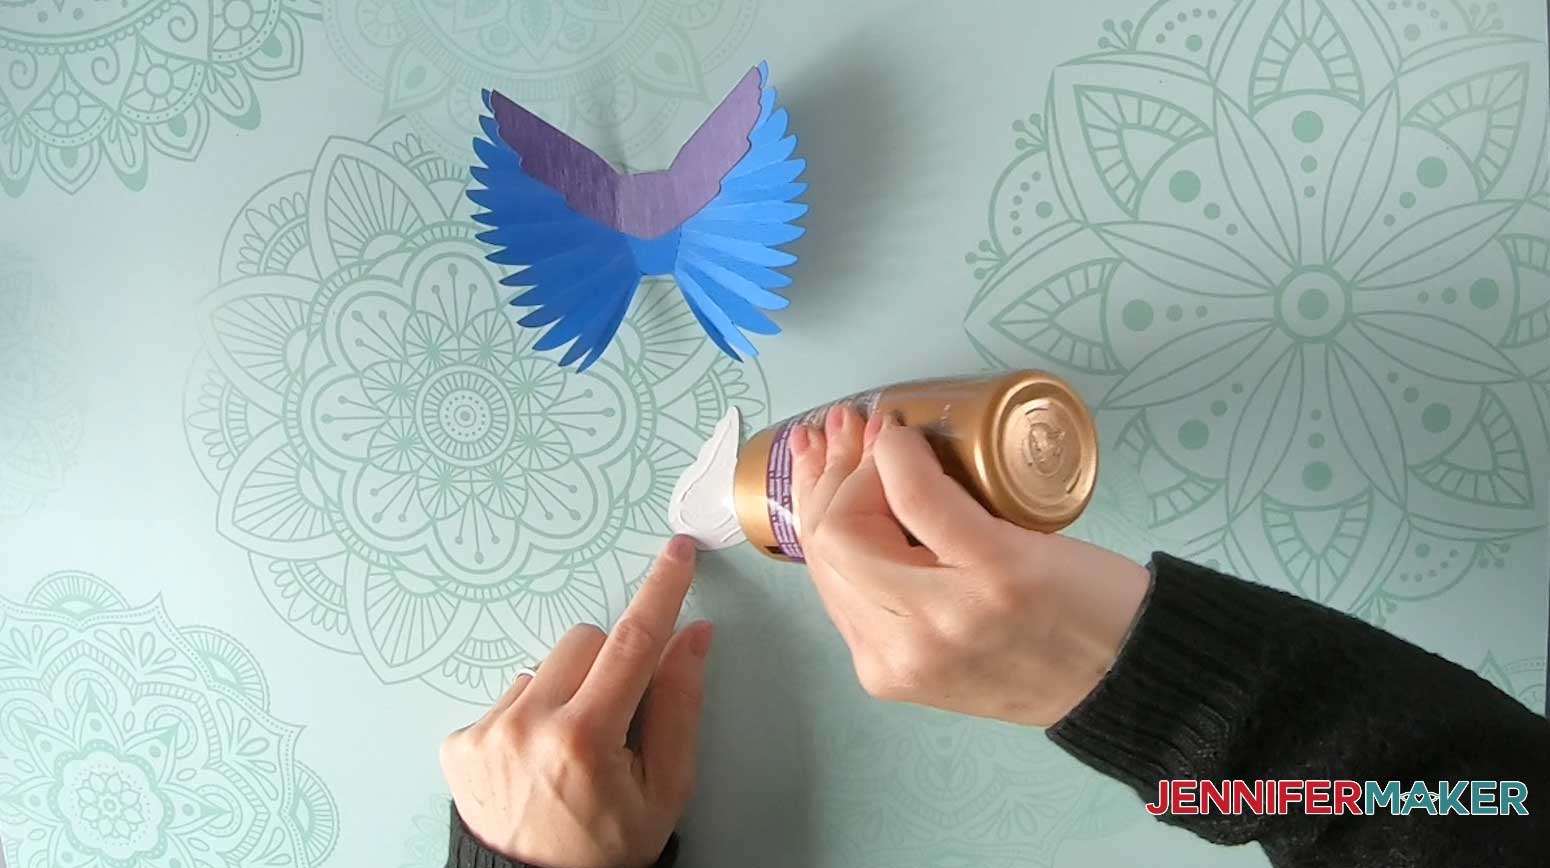 Apply glue to the paper bird top decorative accent piece